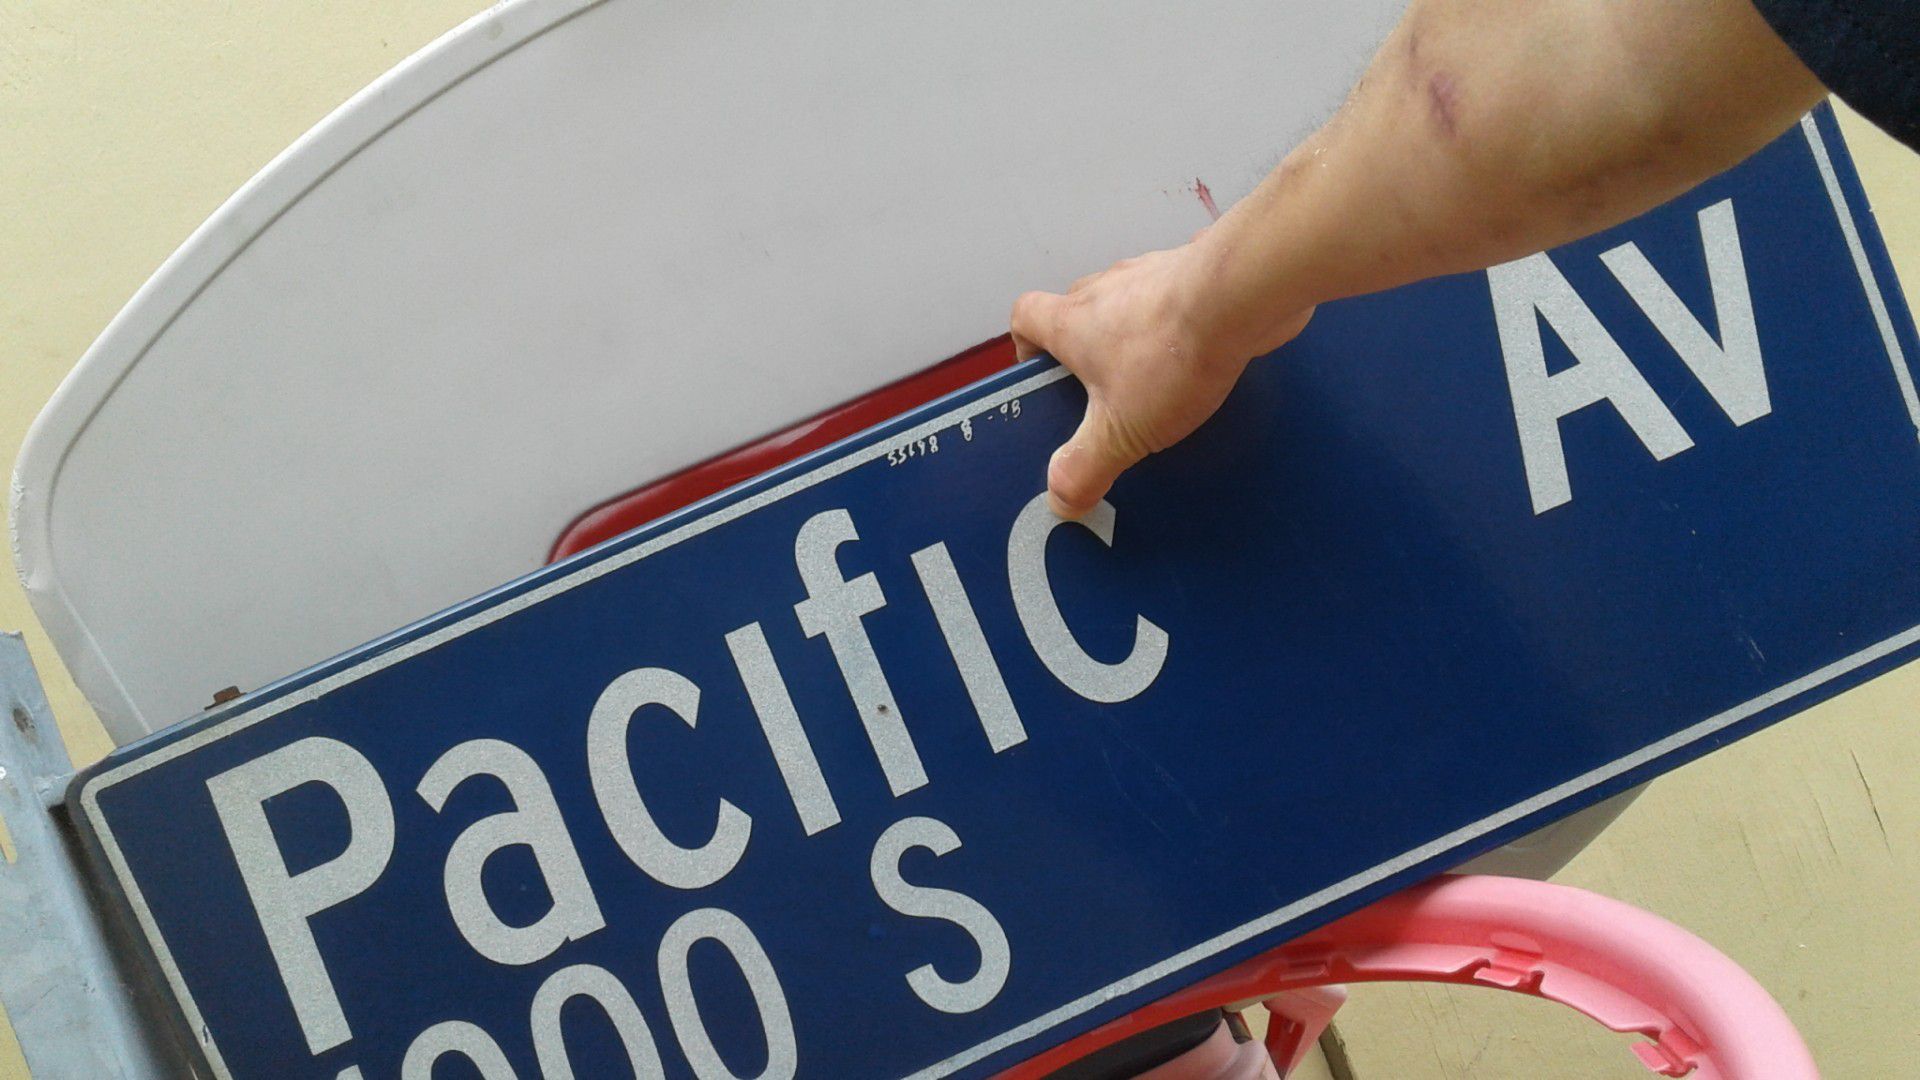 Pacific ave. Street sign.